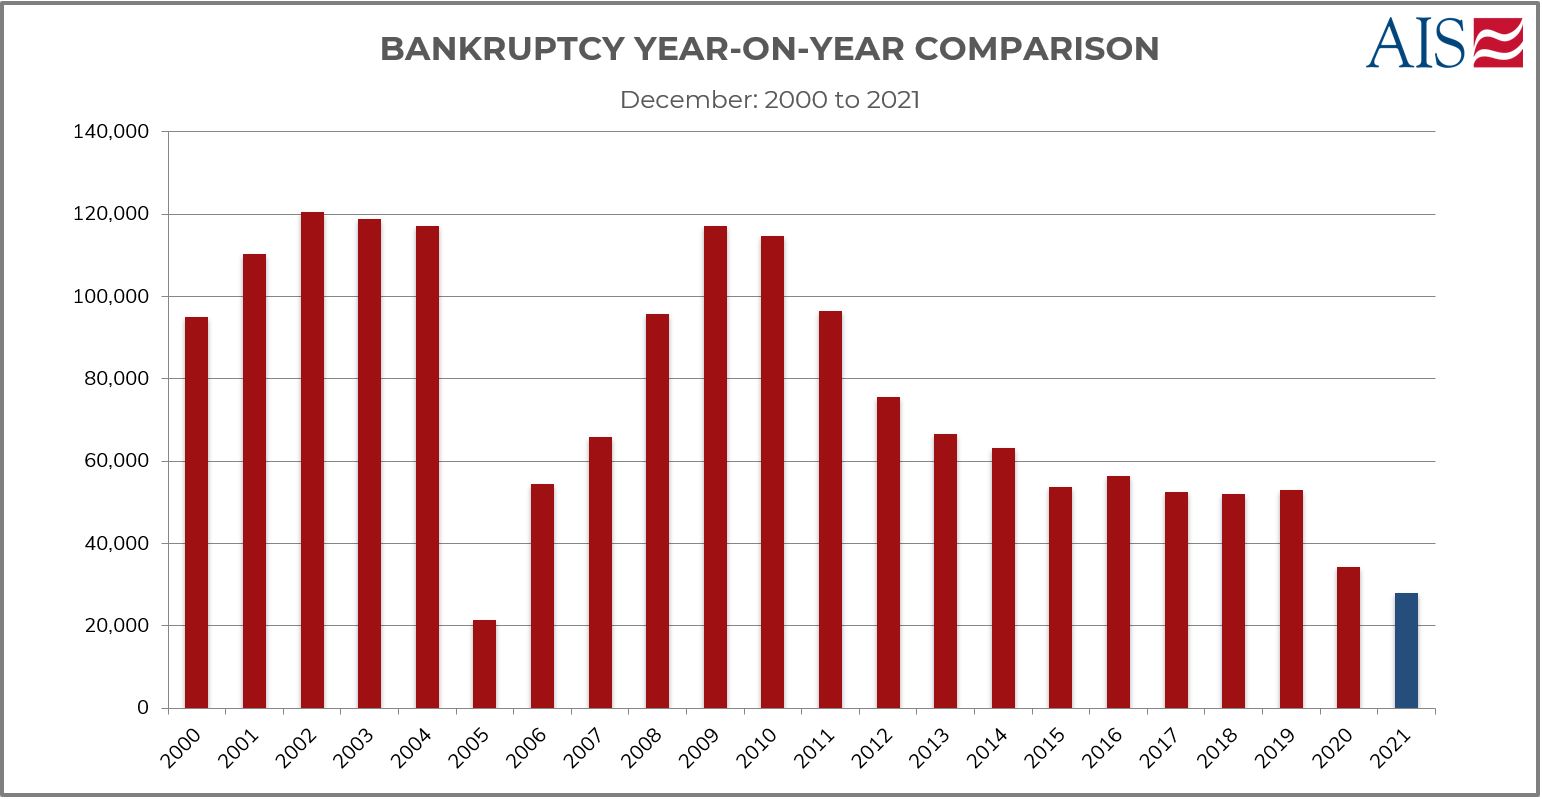 AIS Insight_December 2021_BANKRUPTCY YEAR ON YEAR COMPARISON-1